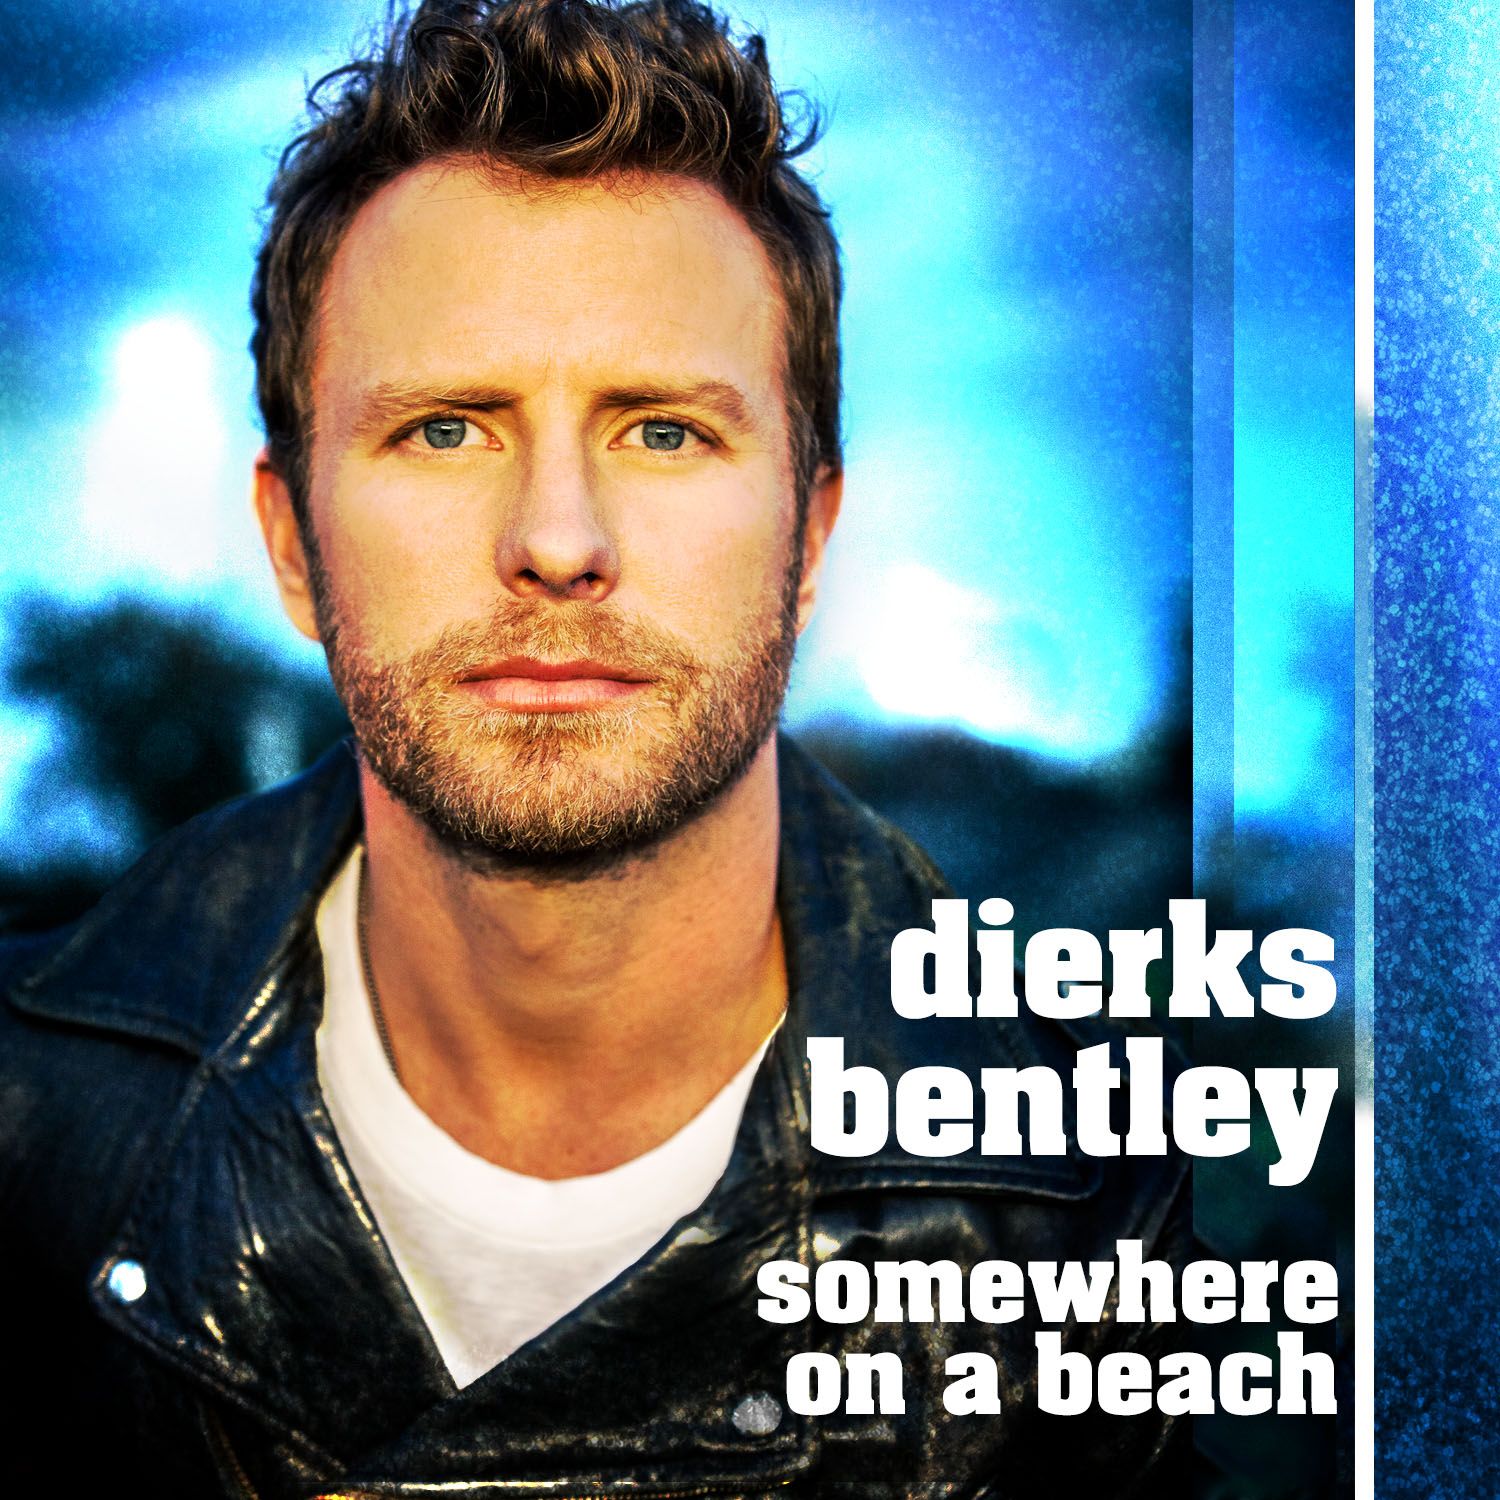 DIERKS BENTLEY LEADS WITH “SOMEWHERE ON A BEACH”  AS FIRST SINGLE AND 2016 TOUR